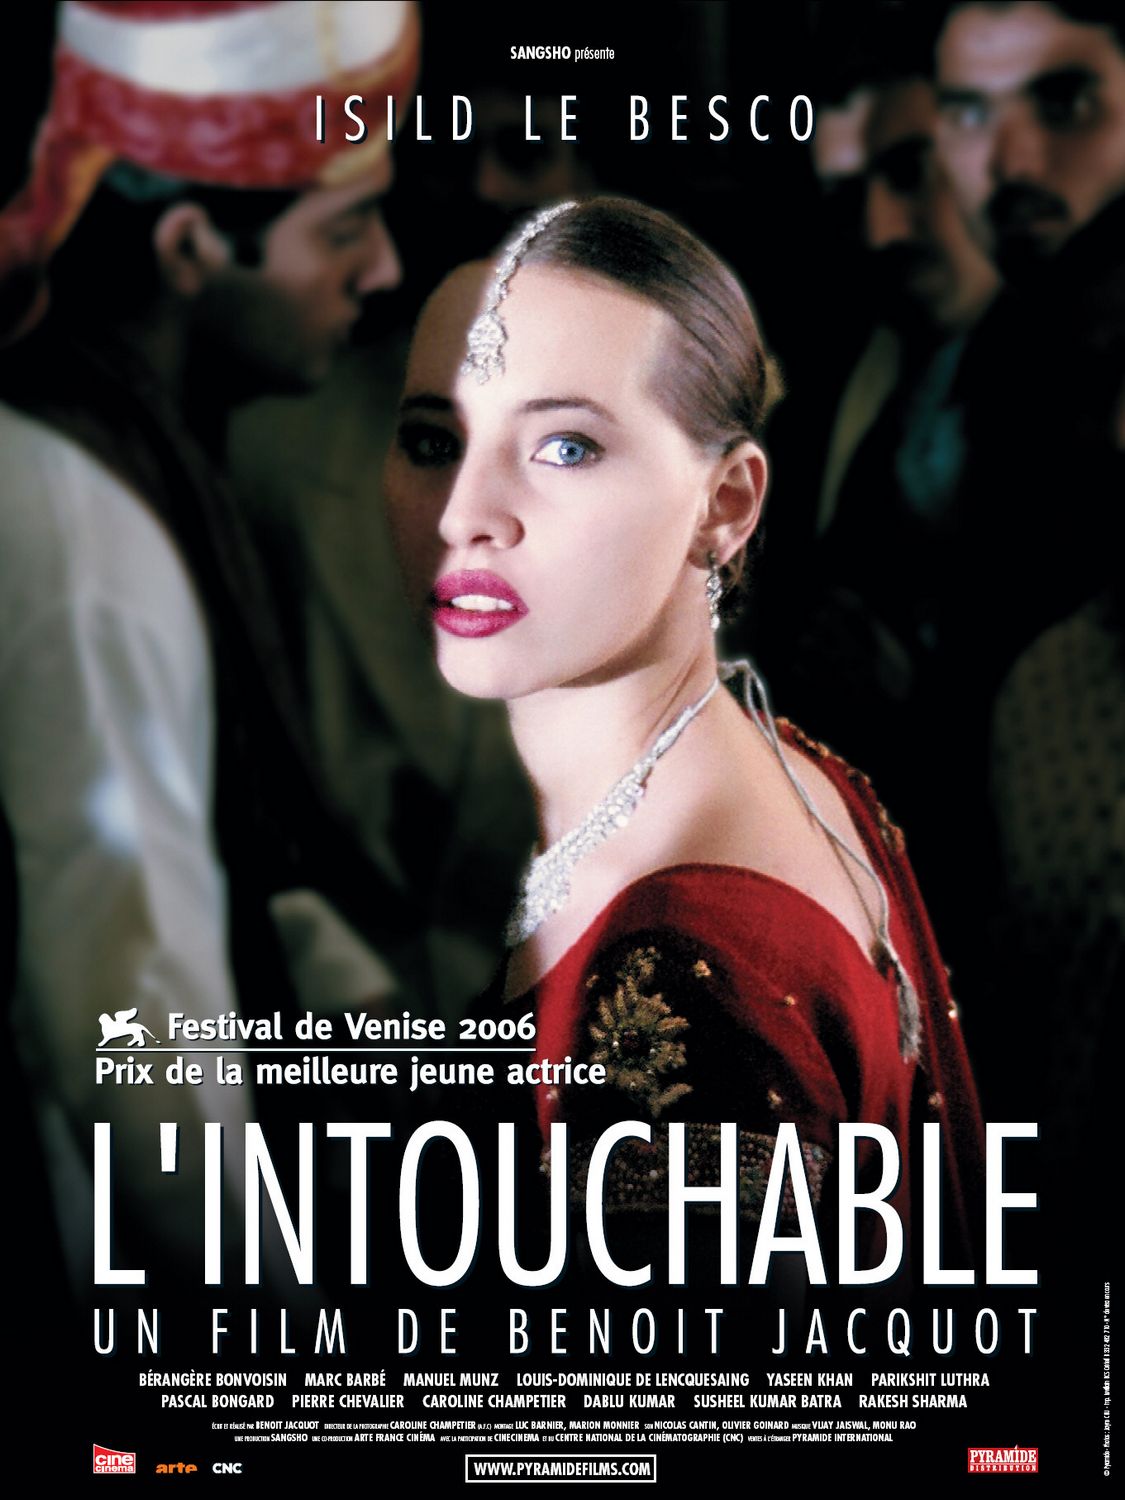 Extra Large Movie Poster Image for Intouchable, L' 